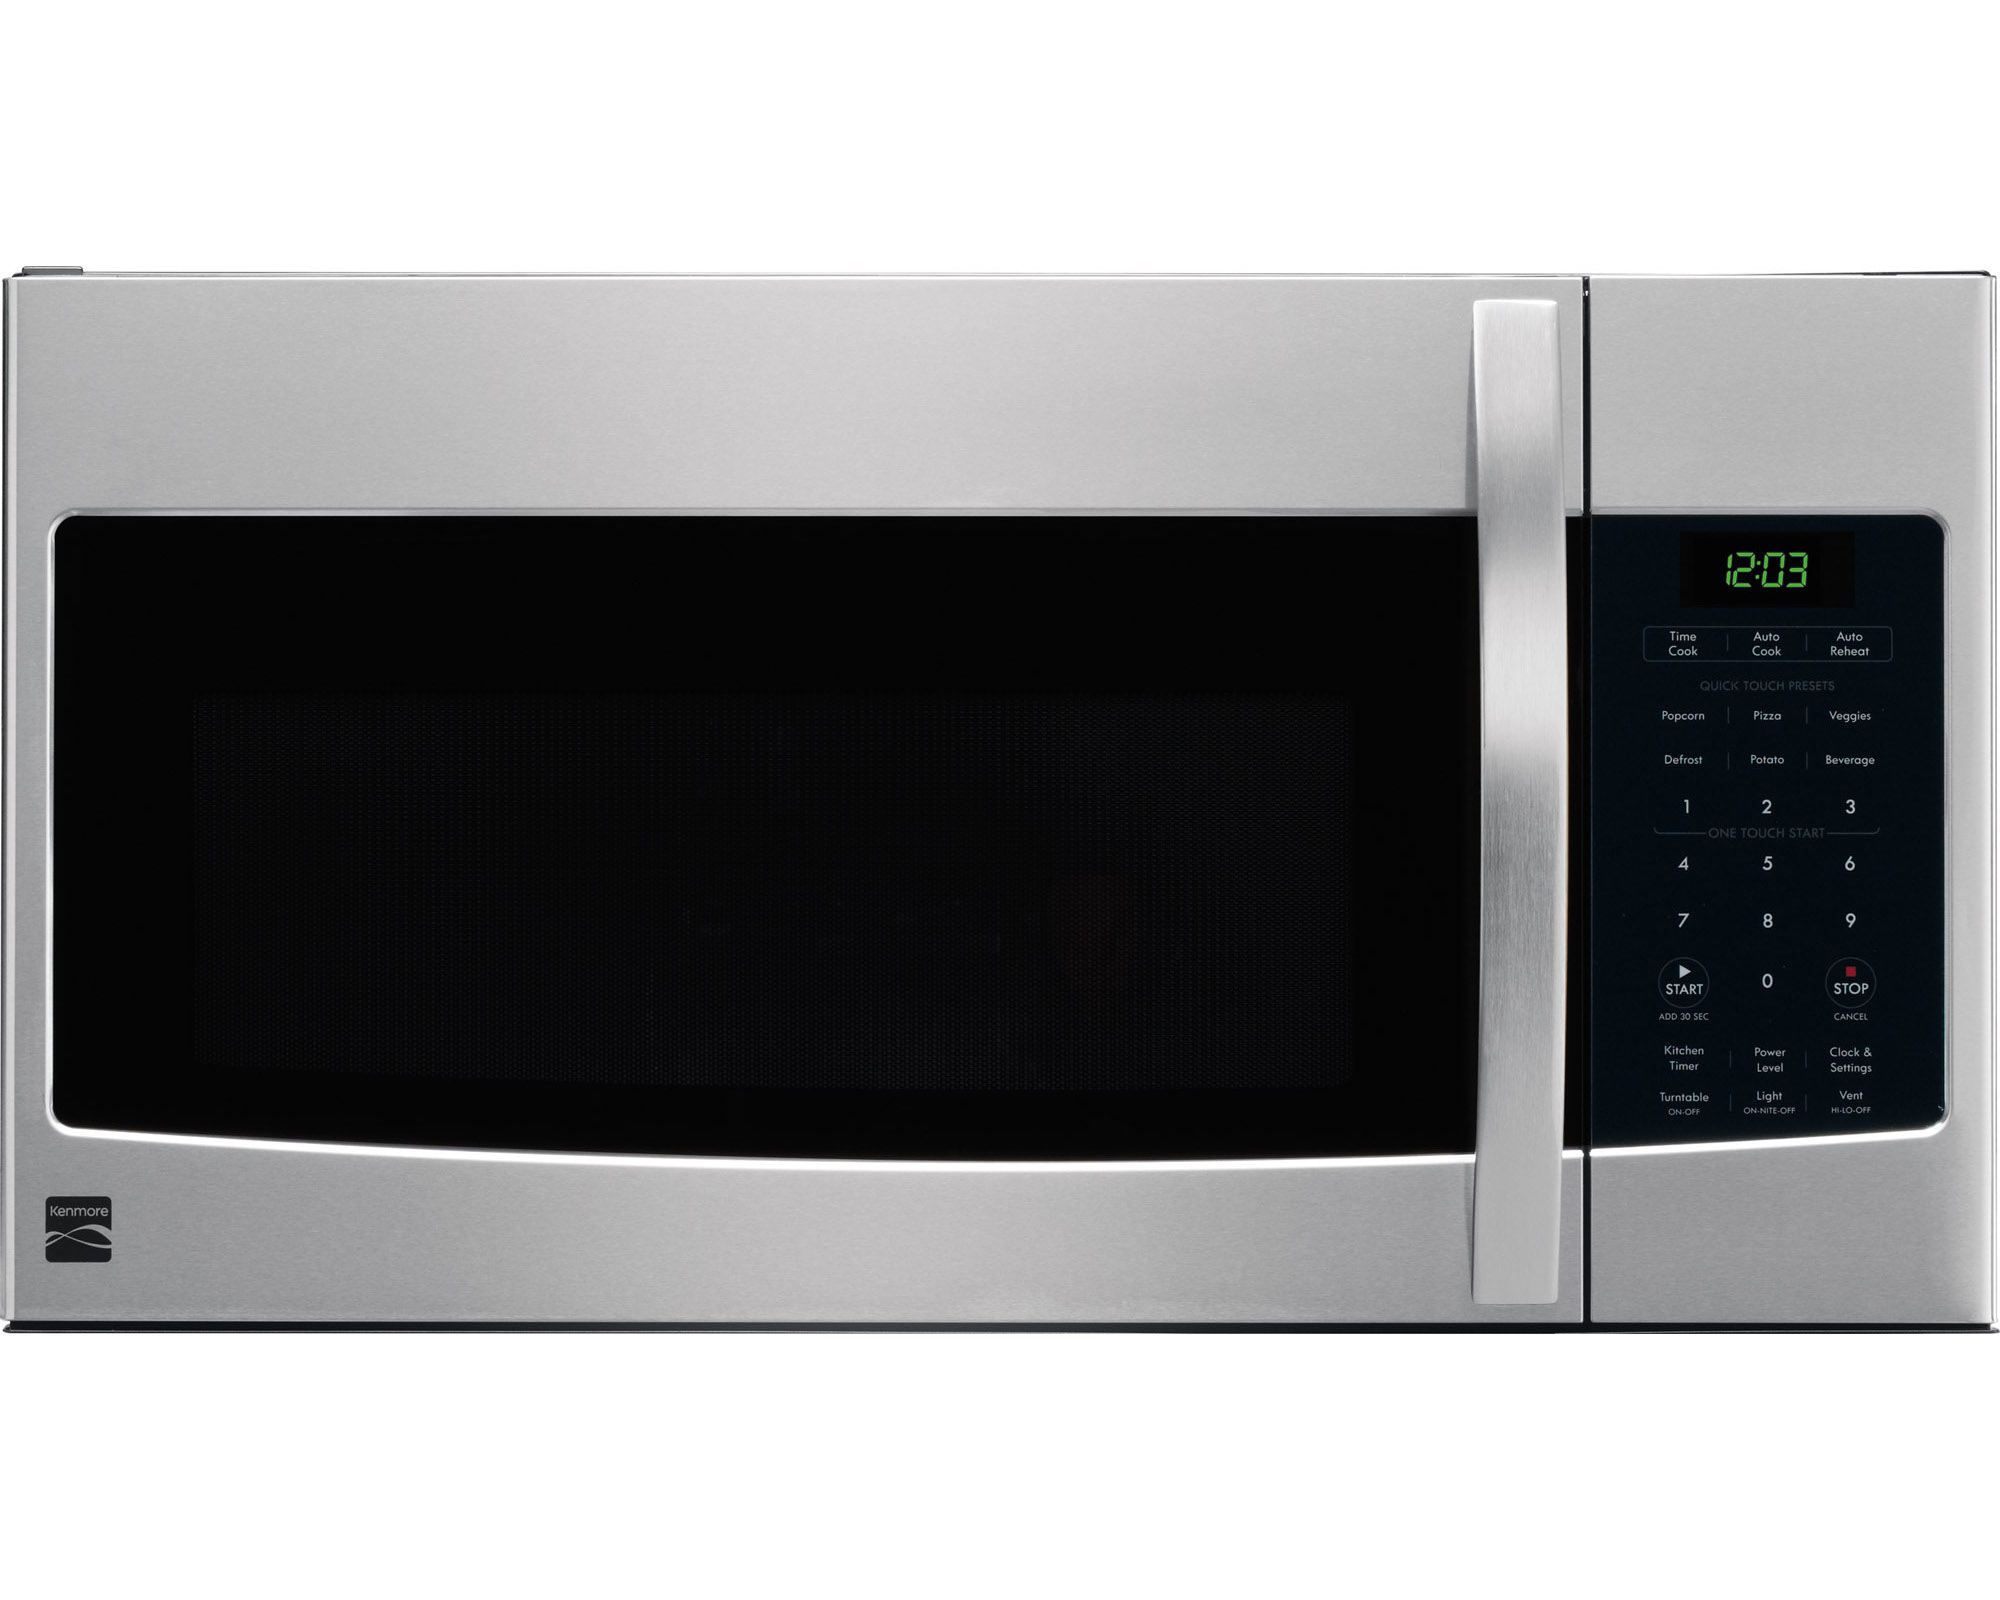 Kenmore 80323 1.6 cu. ft. Over-the-Range Microwave - Stainless Steel